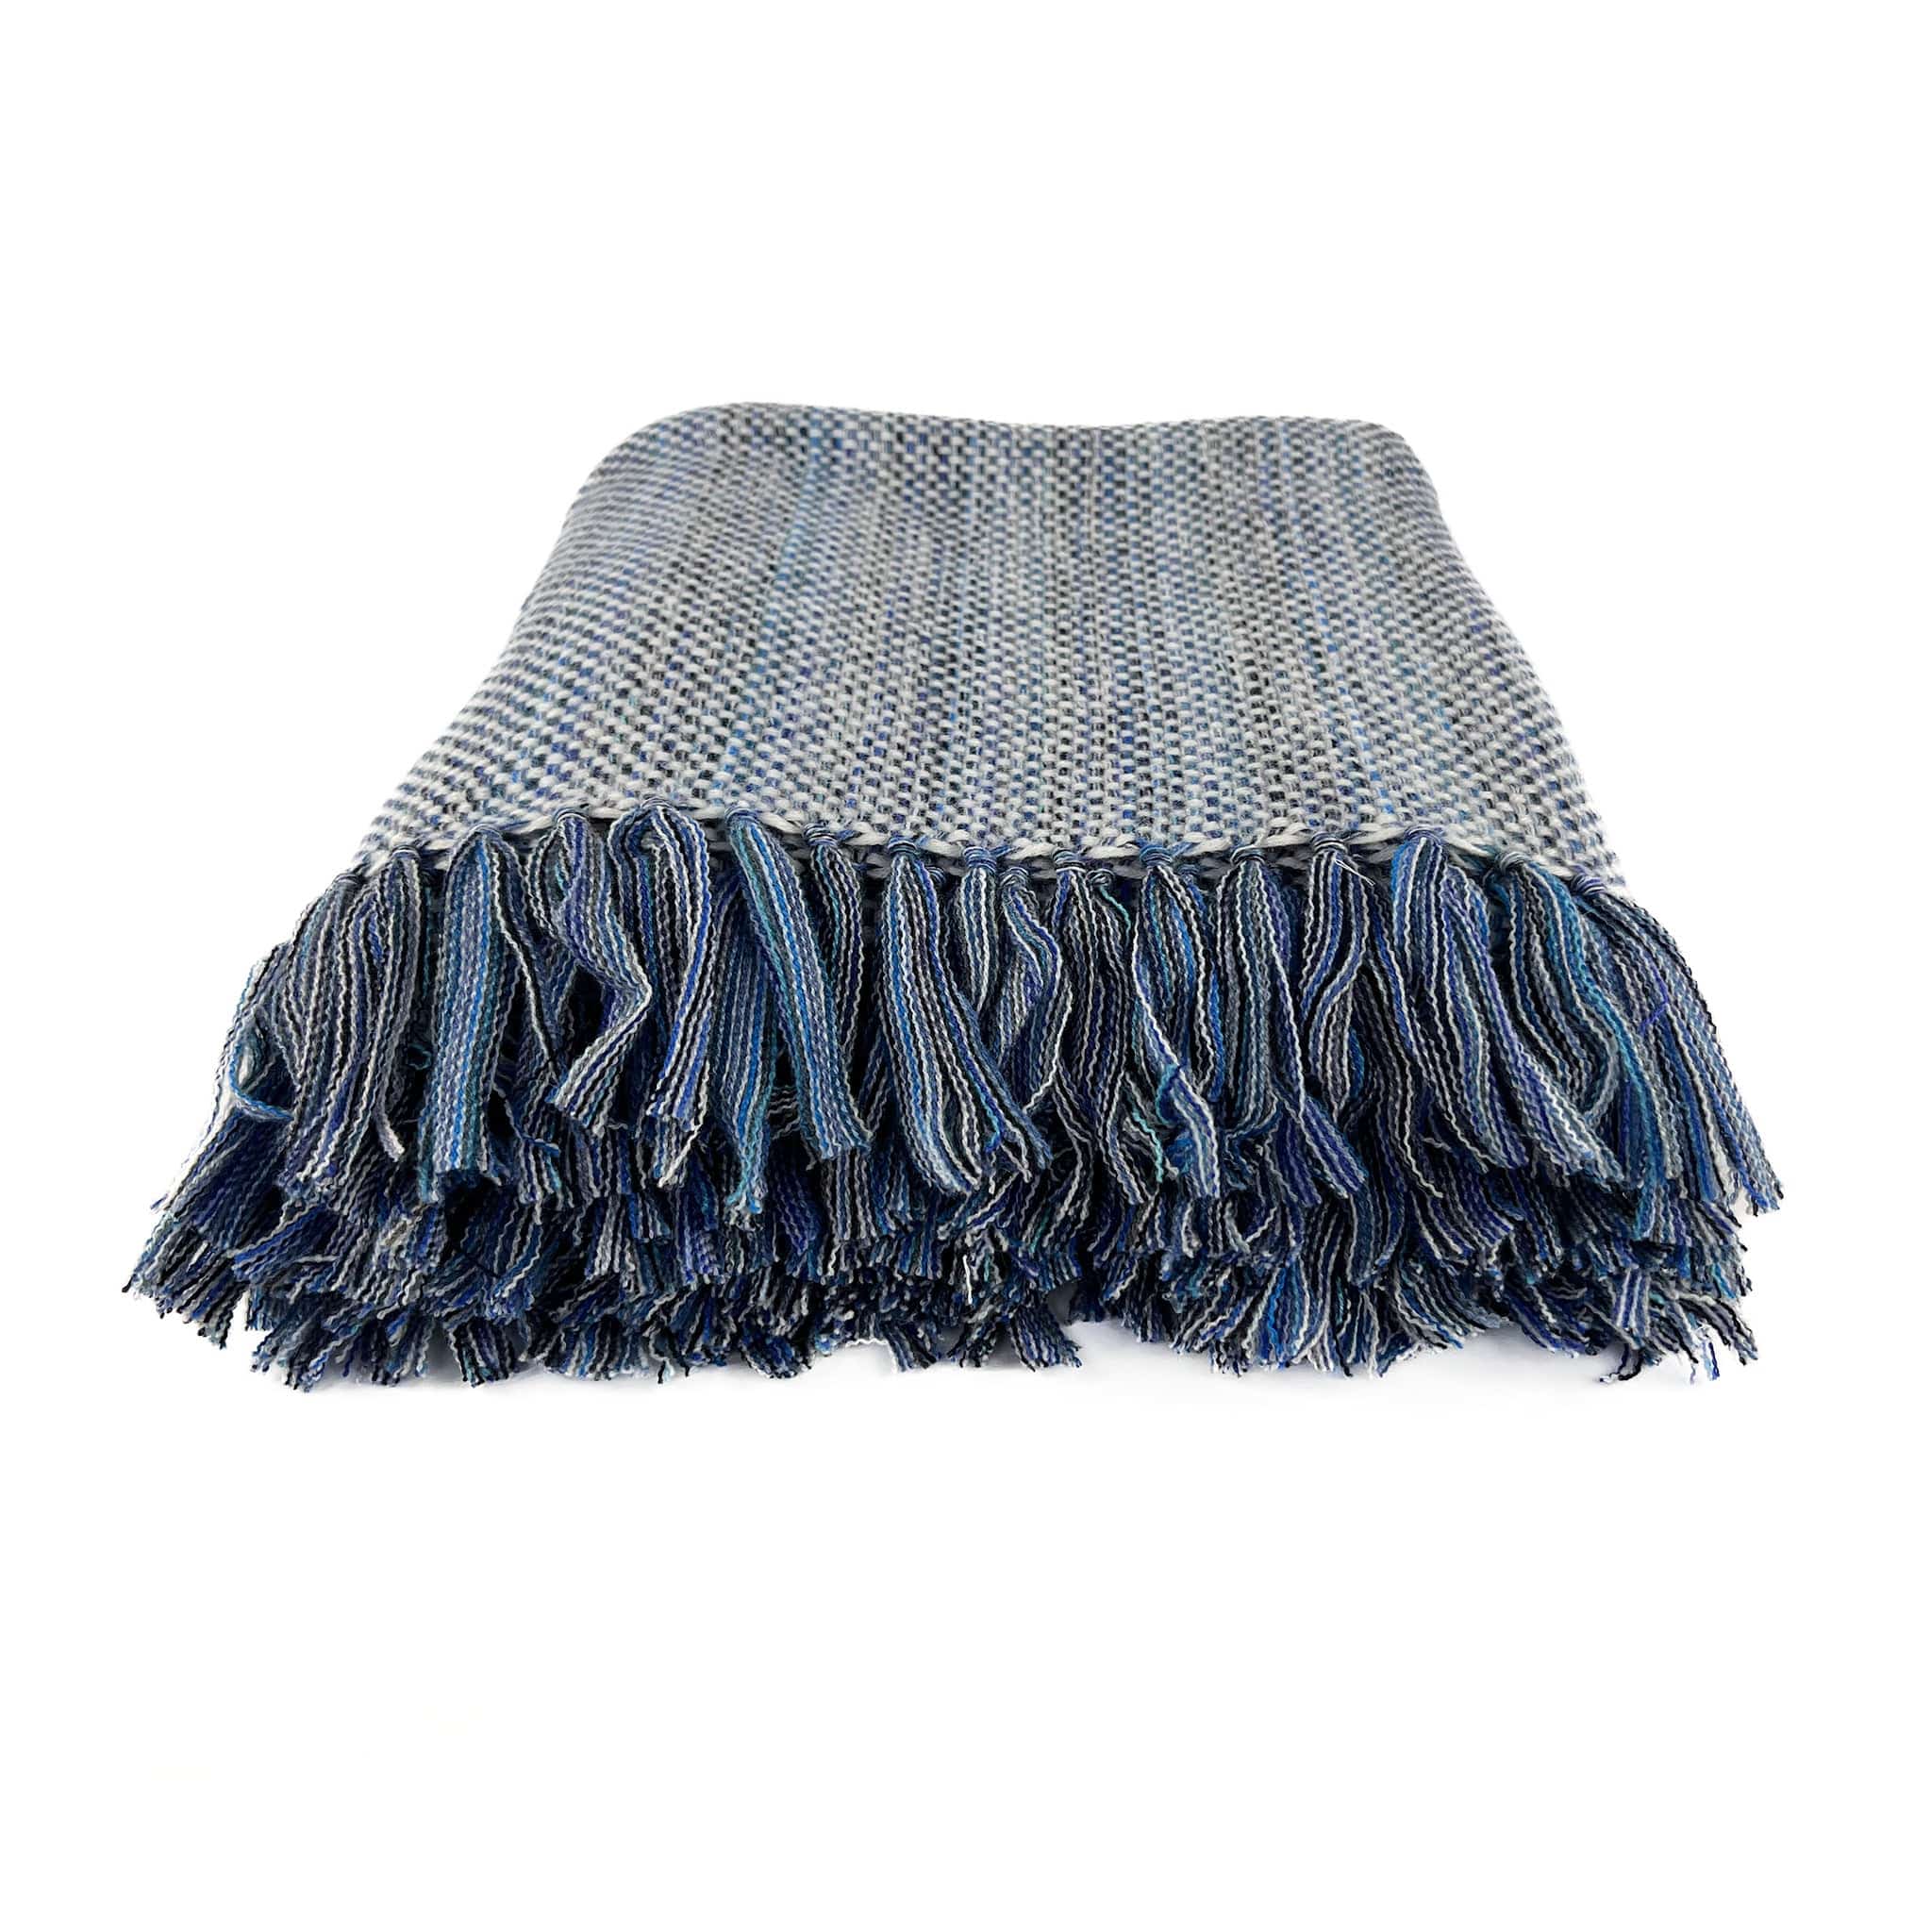 An Italian made Cashmere throw with a white weft and different shades of blue warp, folded on a white background with handknotted multiple shades of blue tassels showing in front